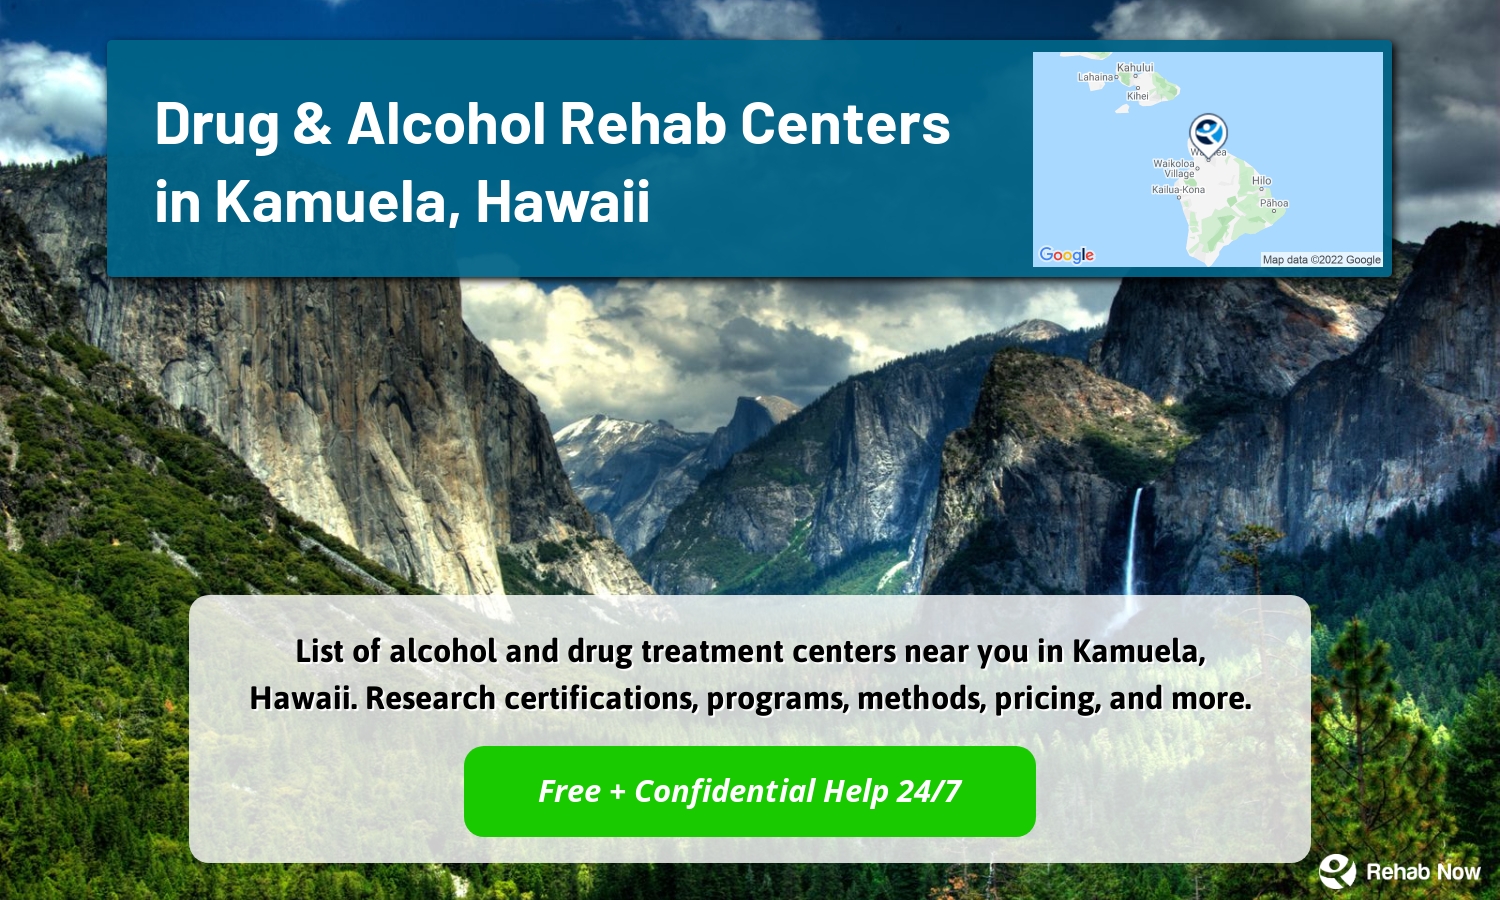 List of alcohol and drug treatment centers near you in Kamuela, Hawaii. Research certifications, programs, methods, pricing, and more.